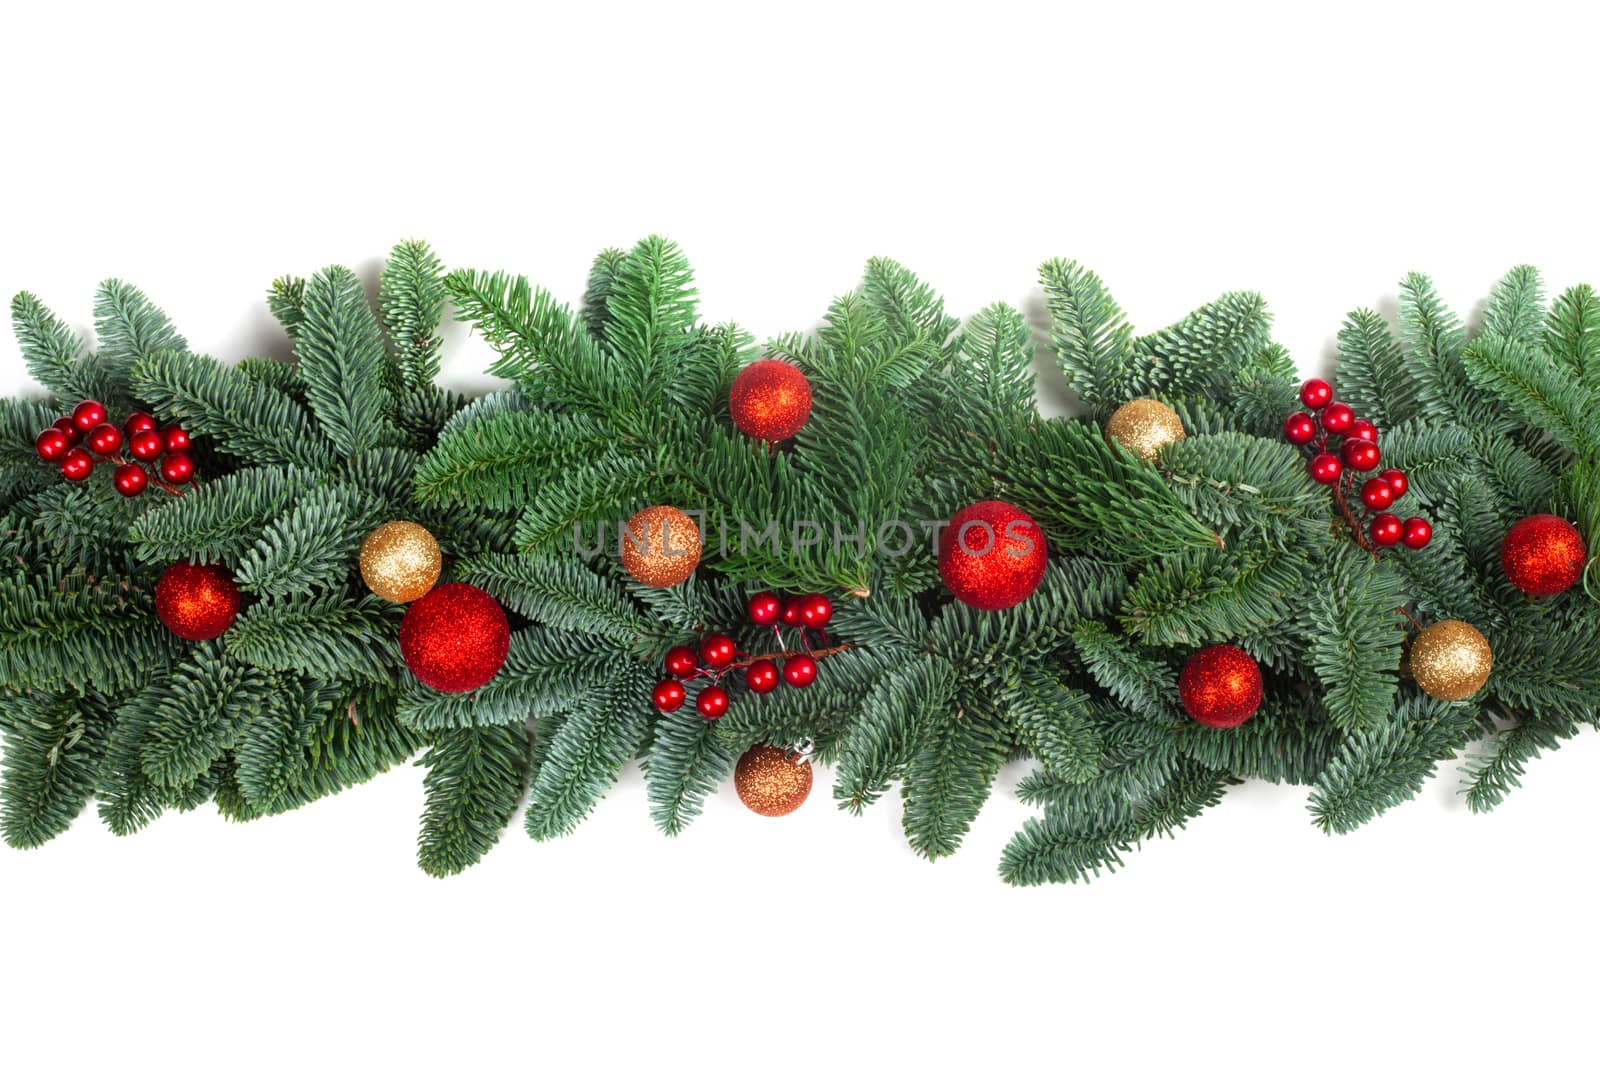 Christmas Border frame of natural noble fir tree branches red and golden baubles isolated on white background